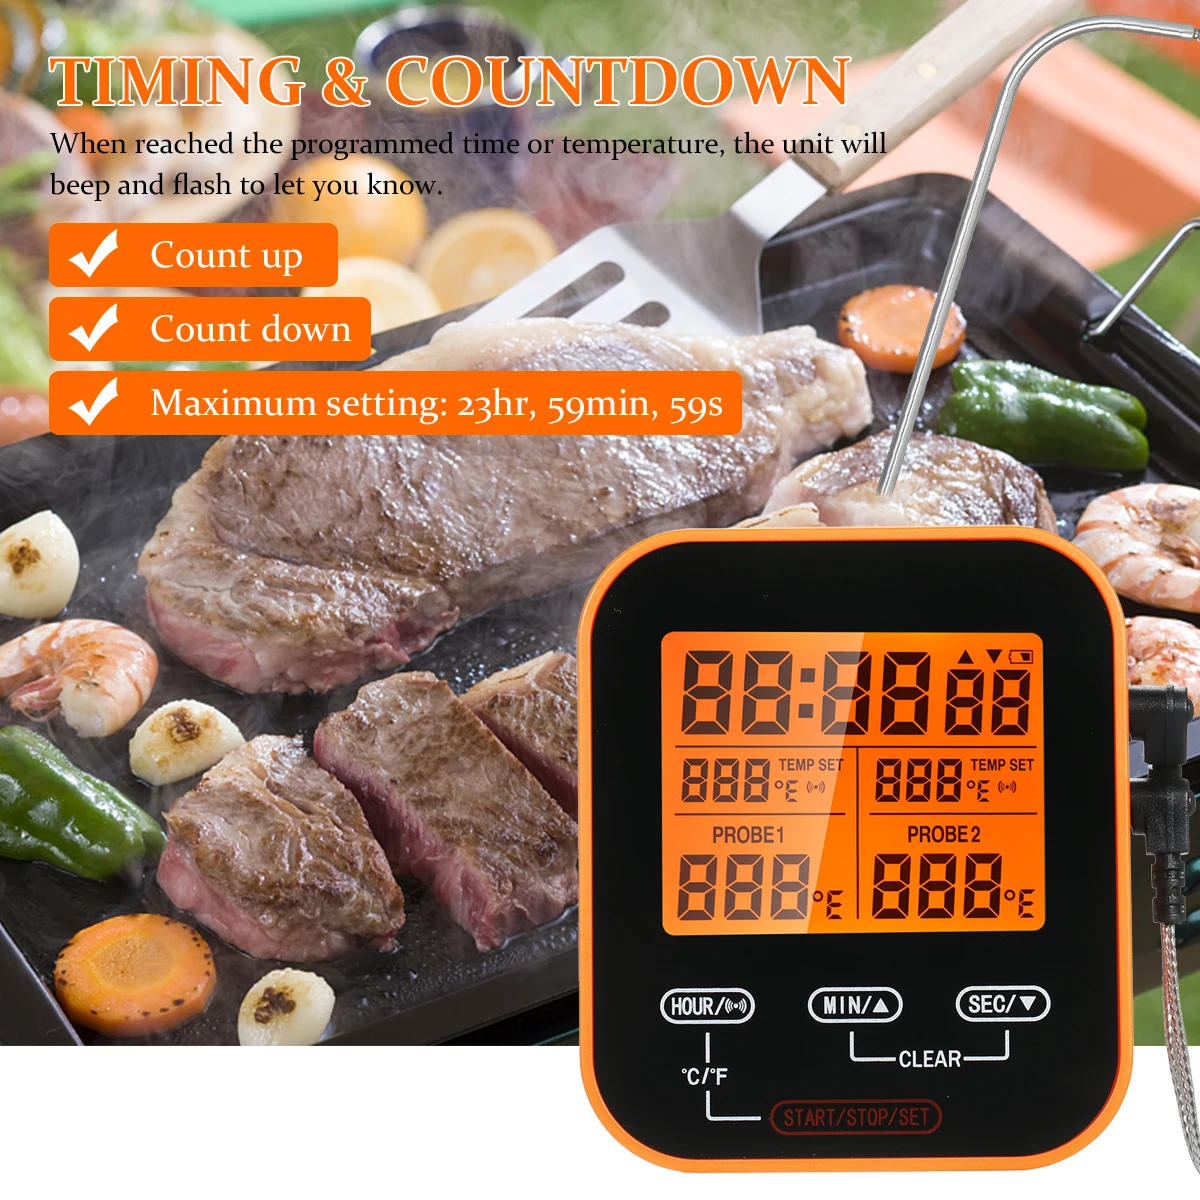 

Digital Food Thermometer Timer Wireless Meat Temperature Probe Thermomter Oven Thermometer for Grill Barbecue Kitchen Cooking